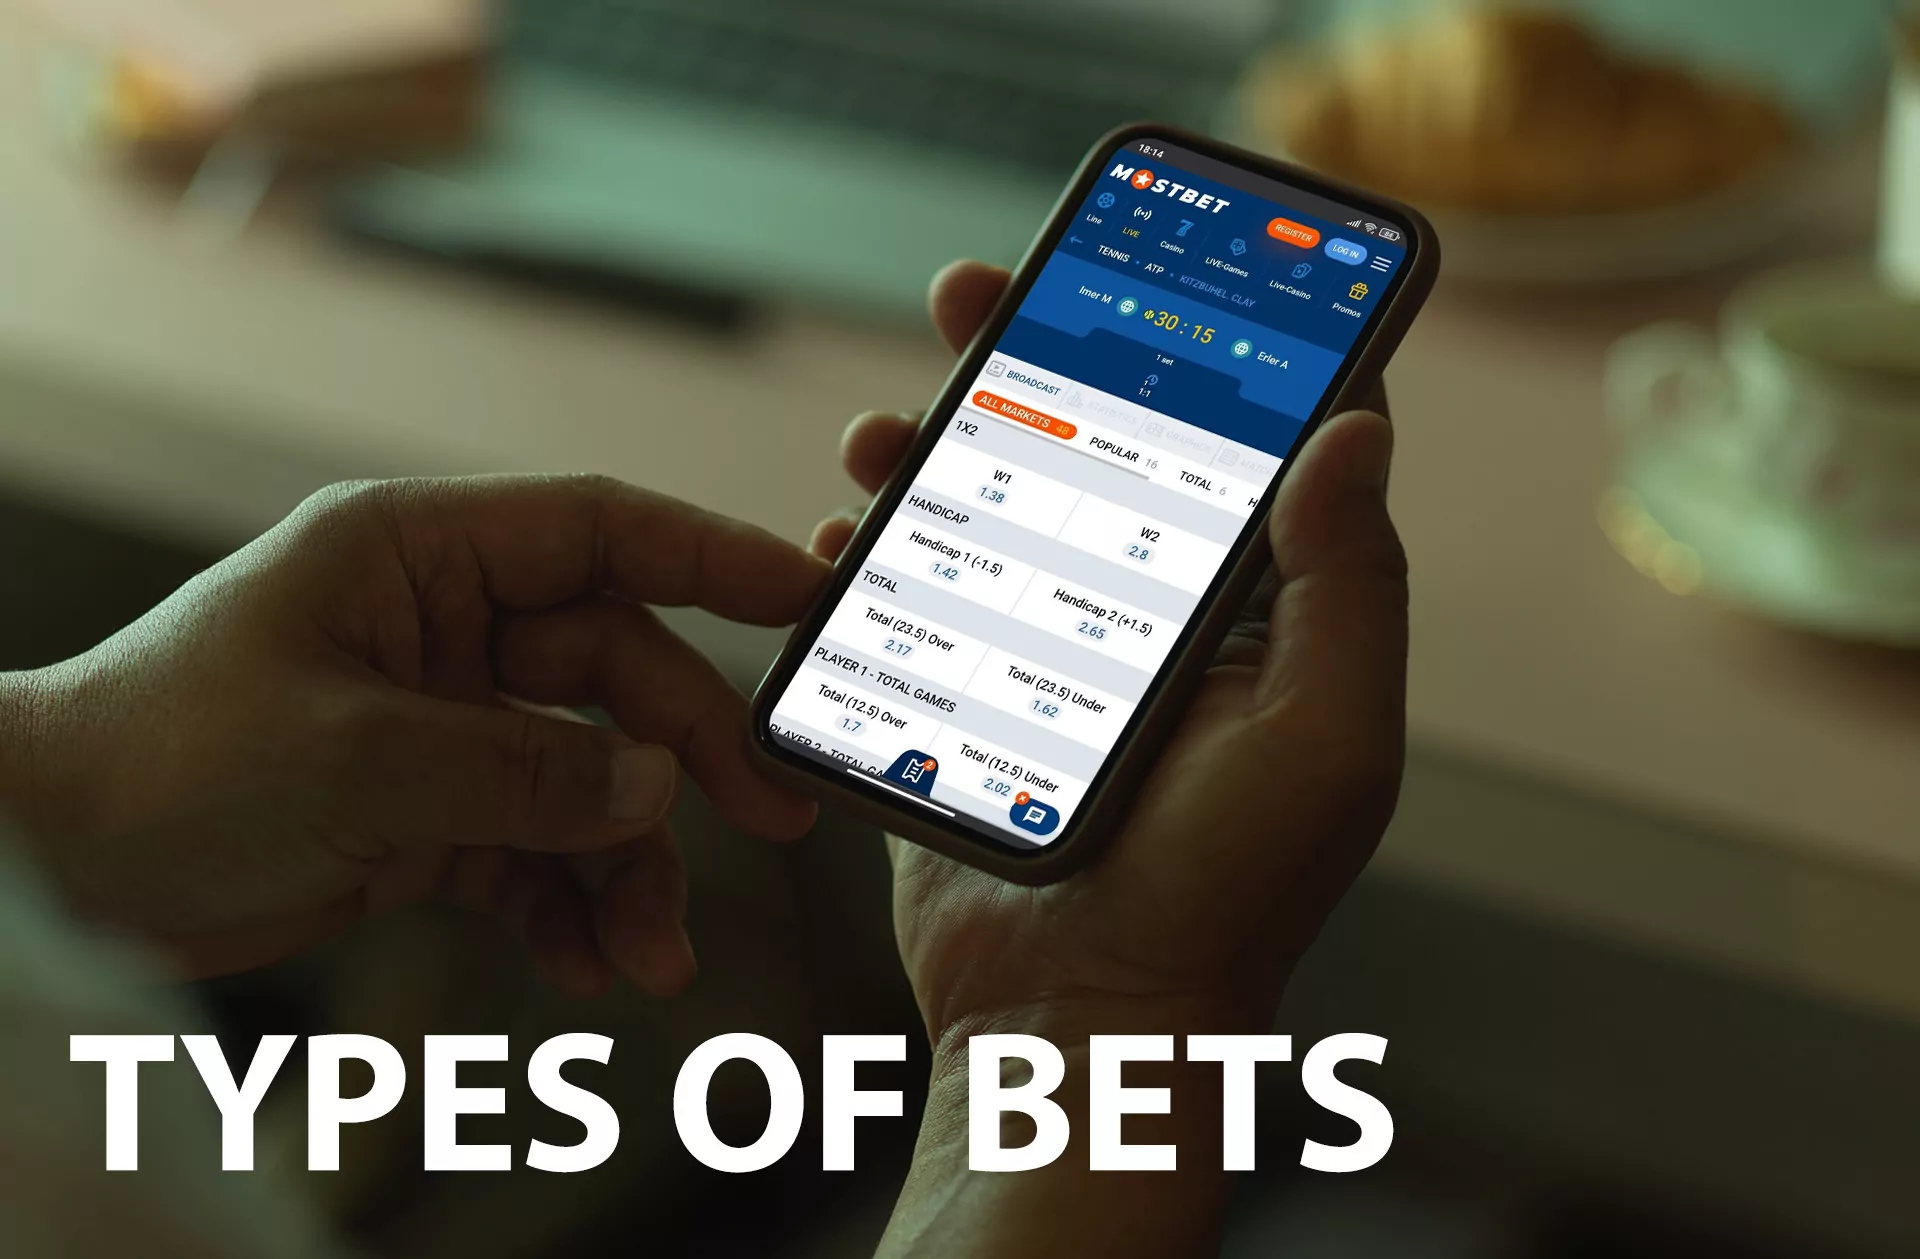 Place single or multiple bets on the match in the Mostbet app.